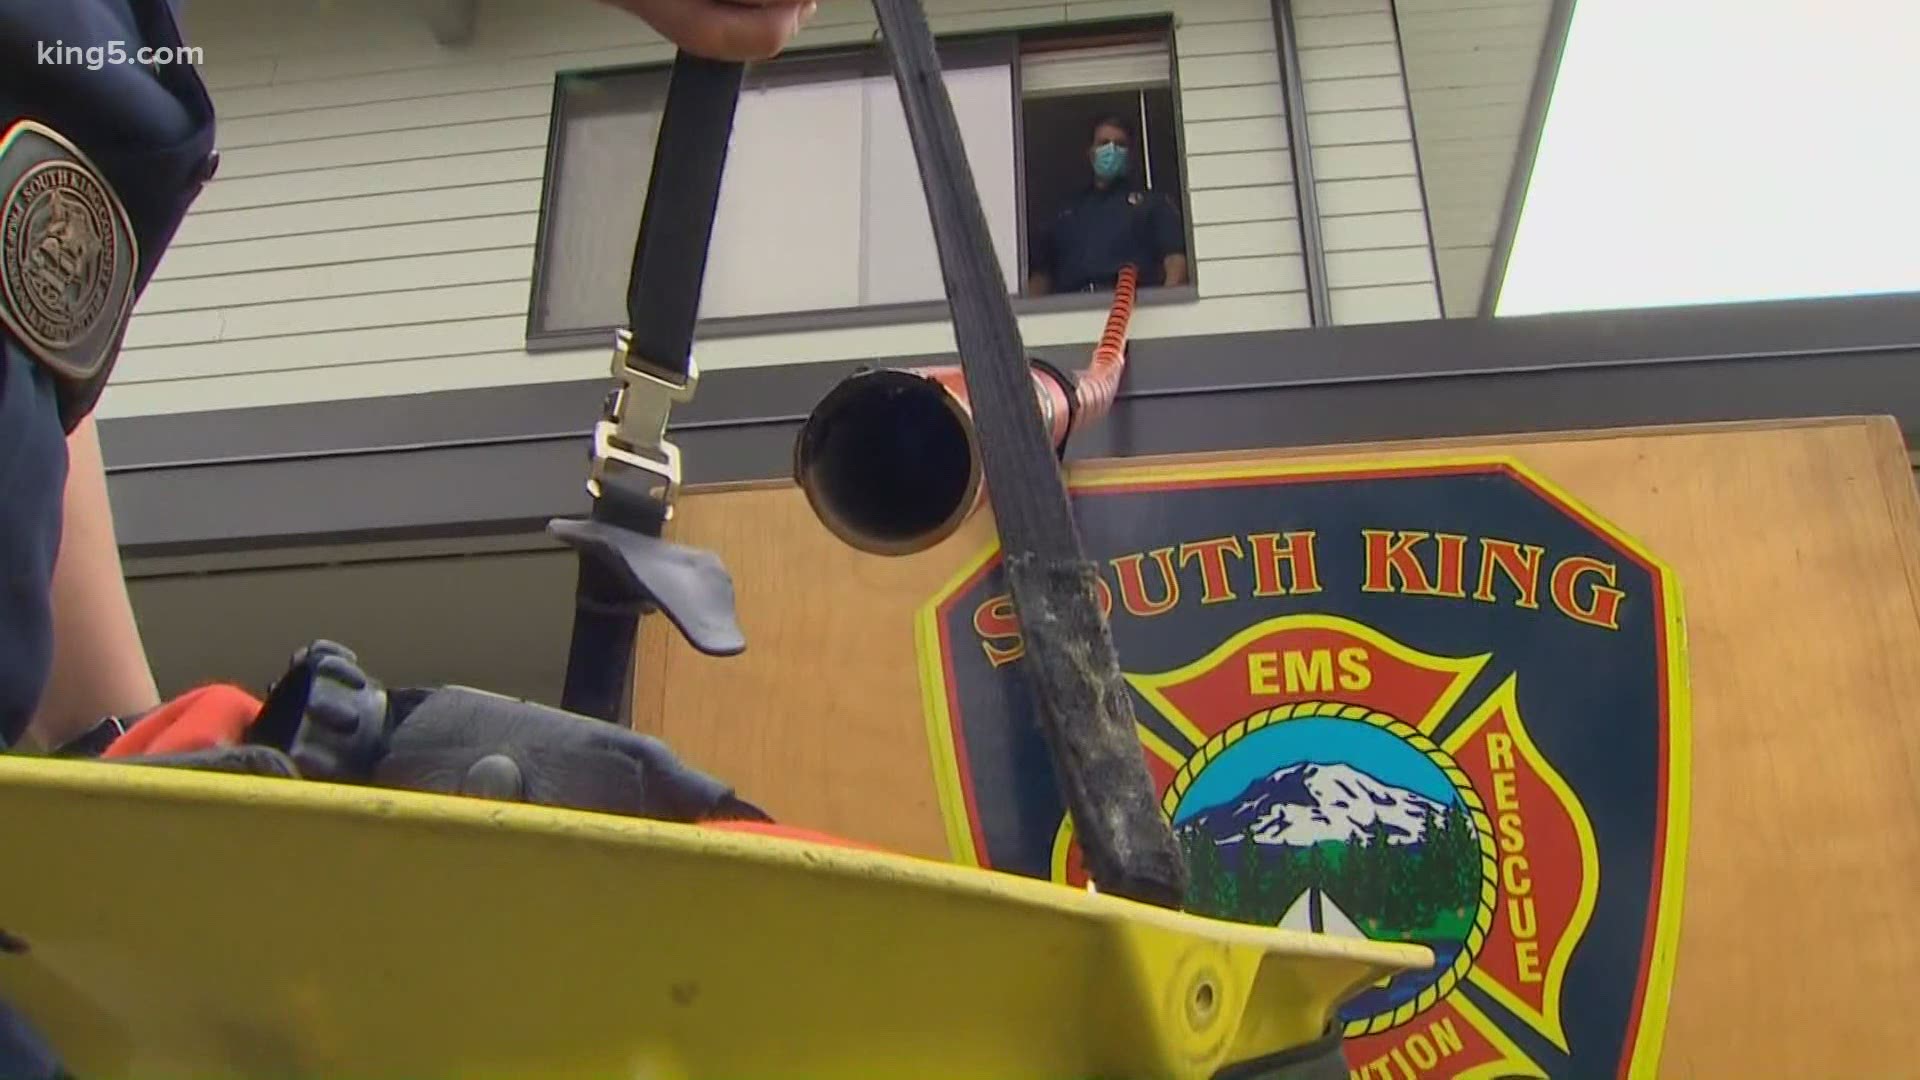 South King Fire and Rescue created a “candy shoot” so kids can trick-or-treat at the fire station from the street on Halloween.